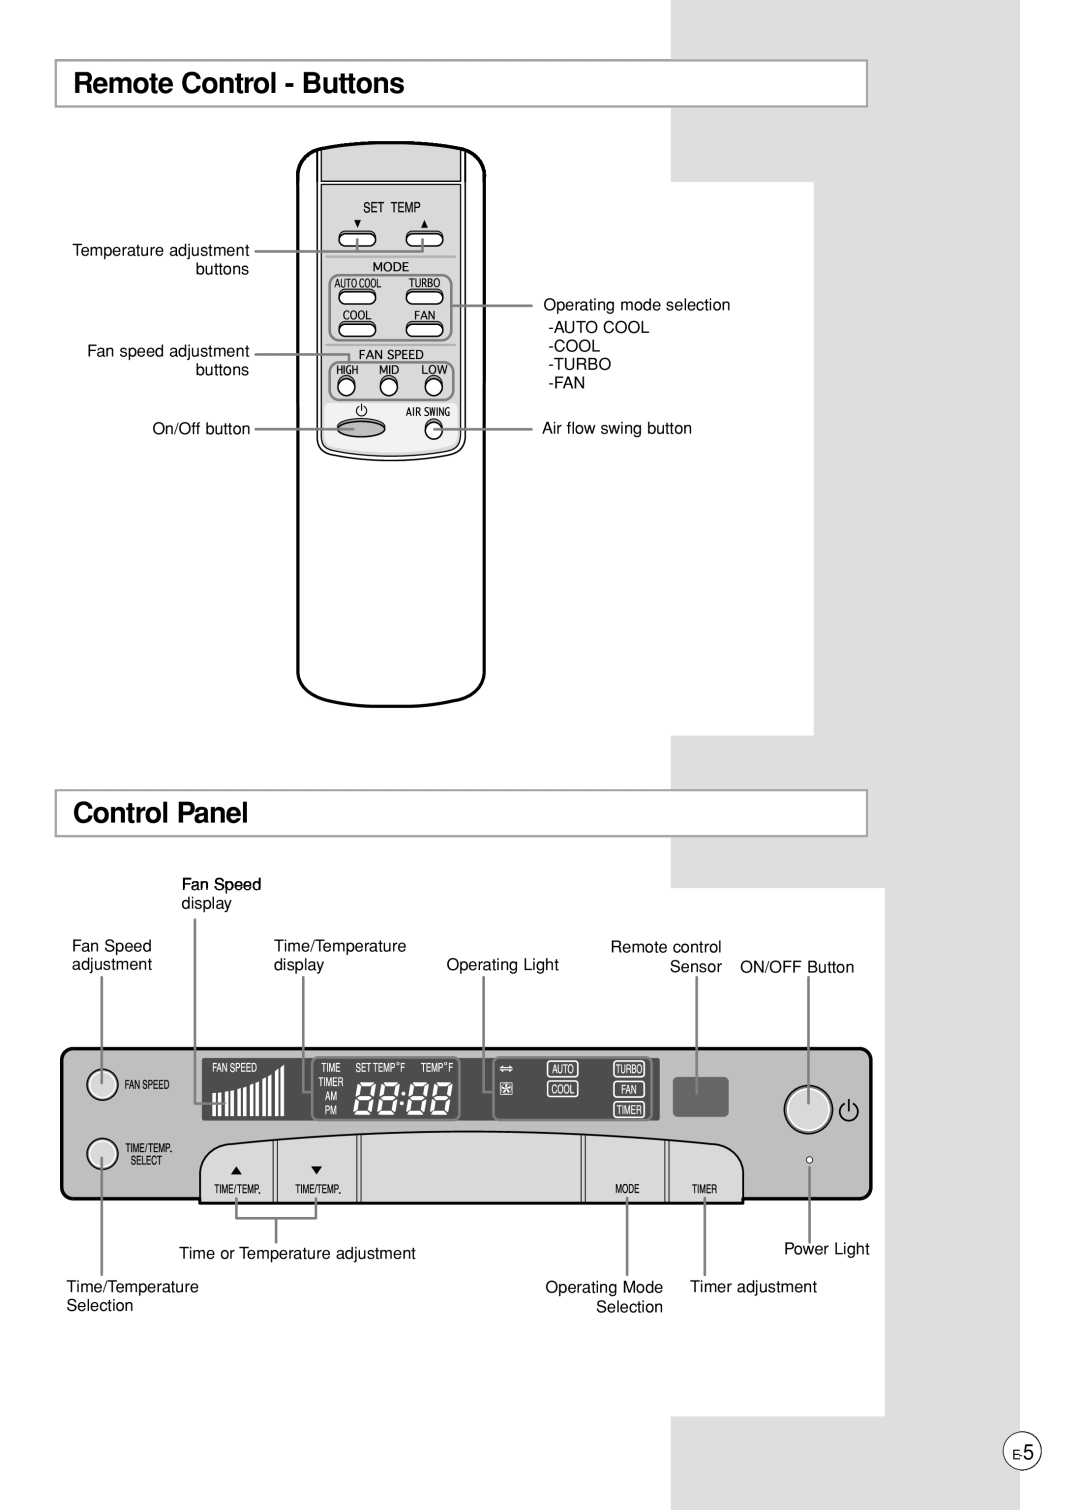 Samsung AP500PF installation manual Remote Control - Buttons, Control Panel 